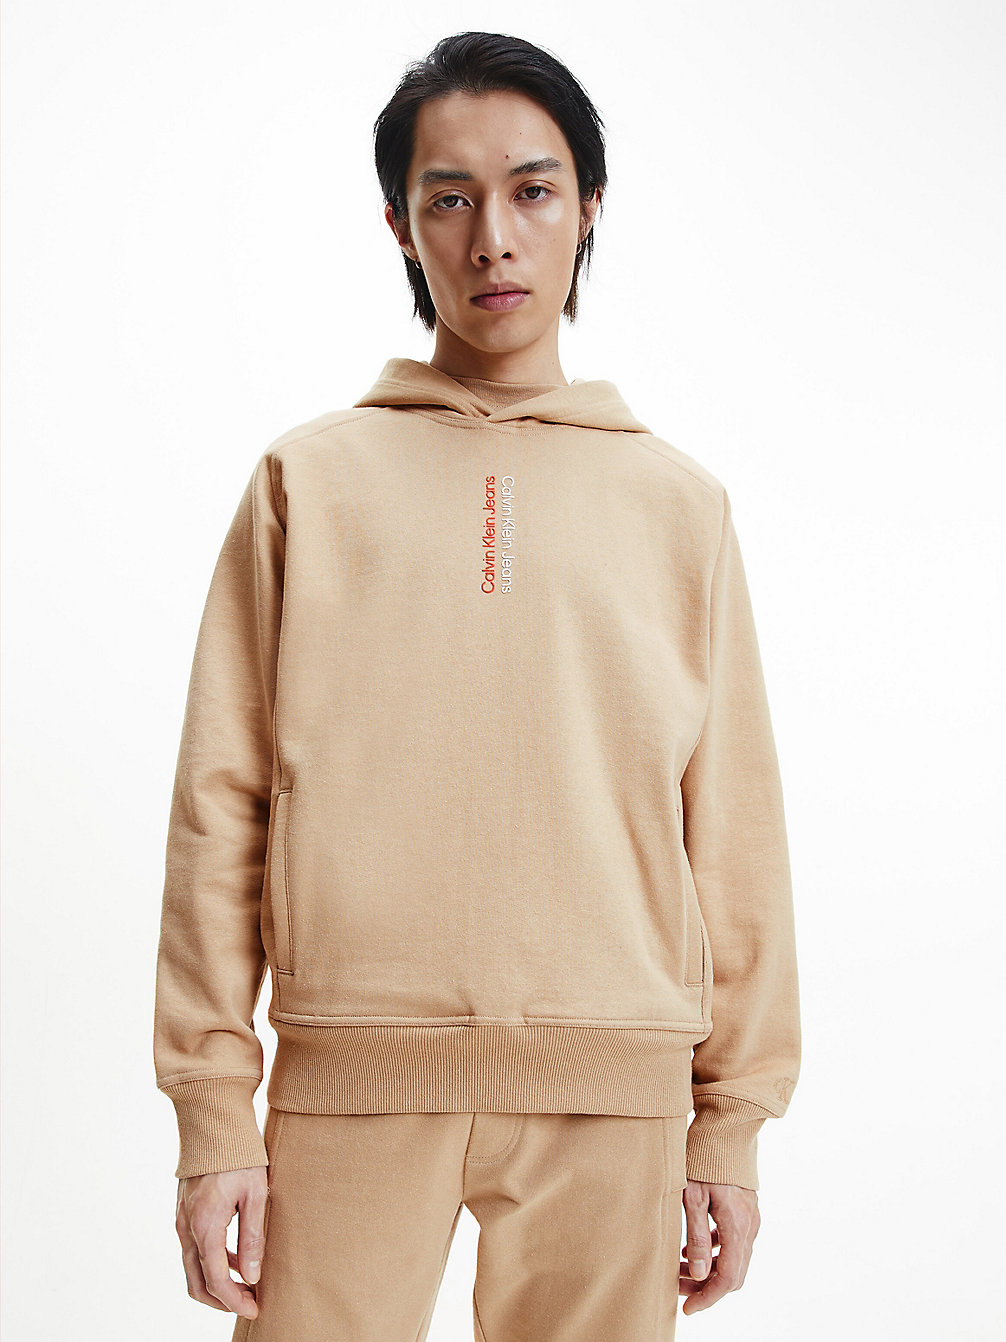 TAWNY SAND Recycled Cotton Hoodie undefined men Calvin Klein